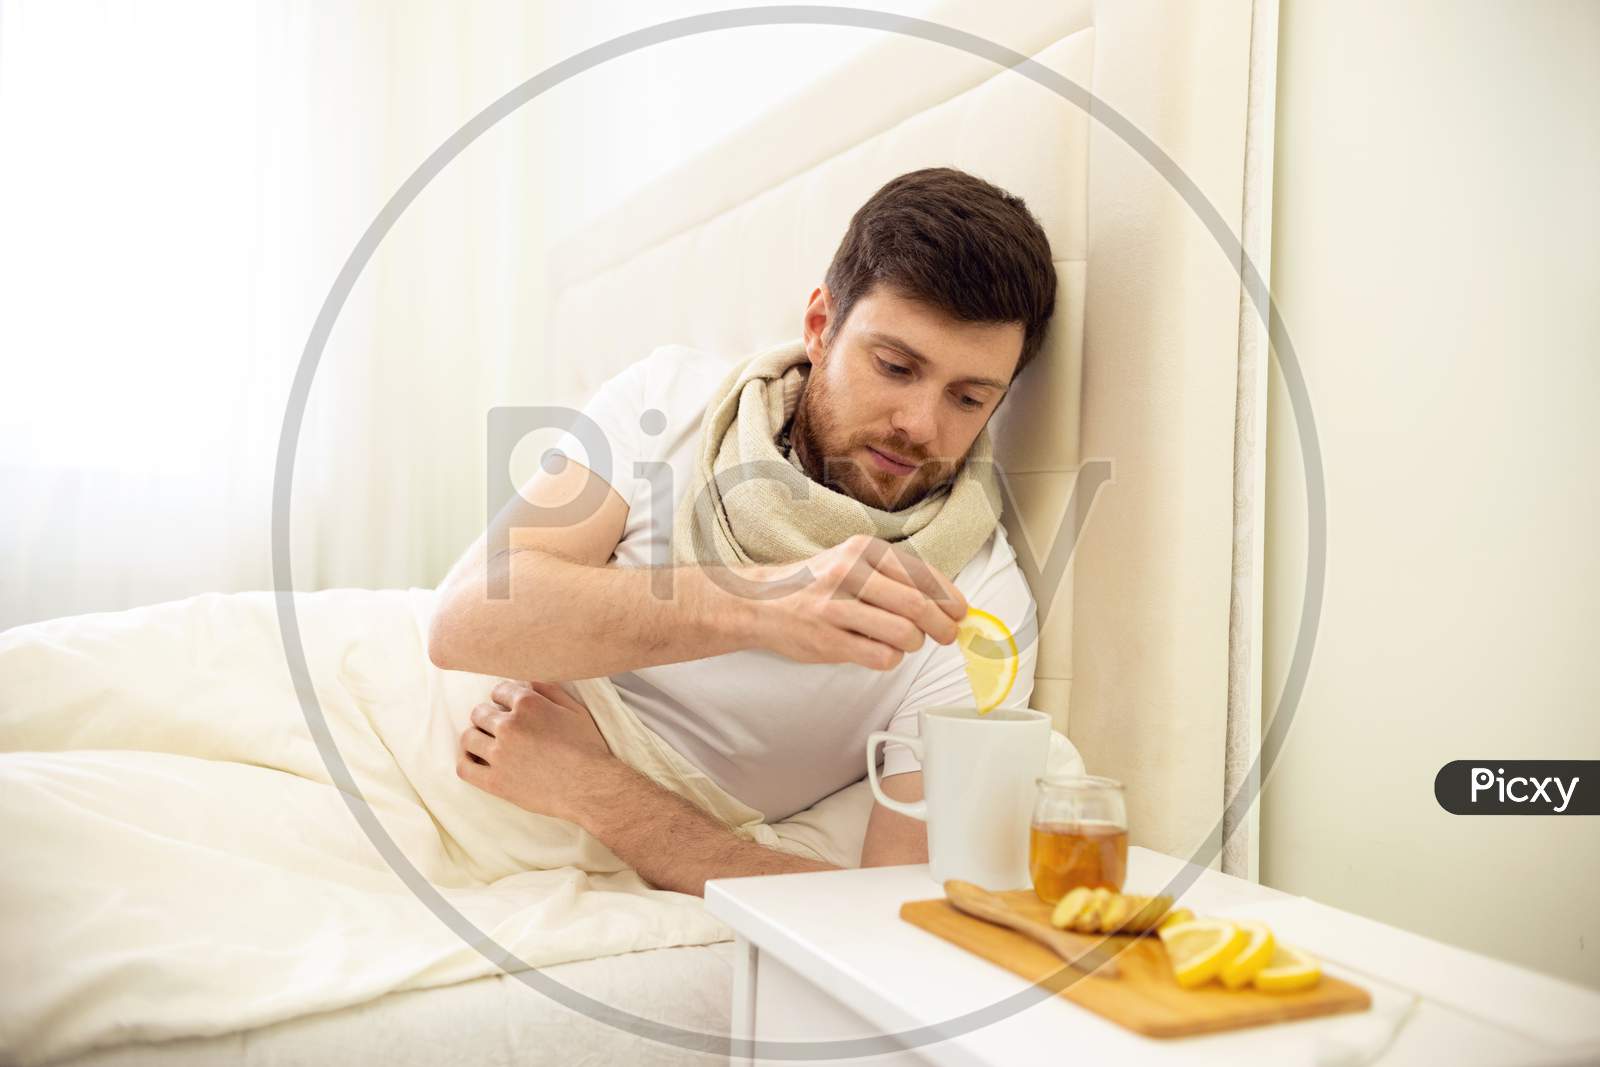 Sick Man In Bed Adding Lemon Into Tee. Man Ill In Bed Self Healing. Self Treatment At Home. Man Drinking Hot Tea In Bed.